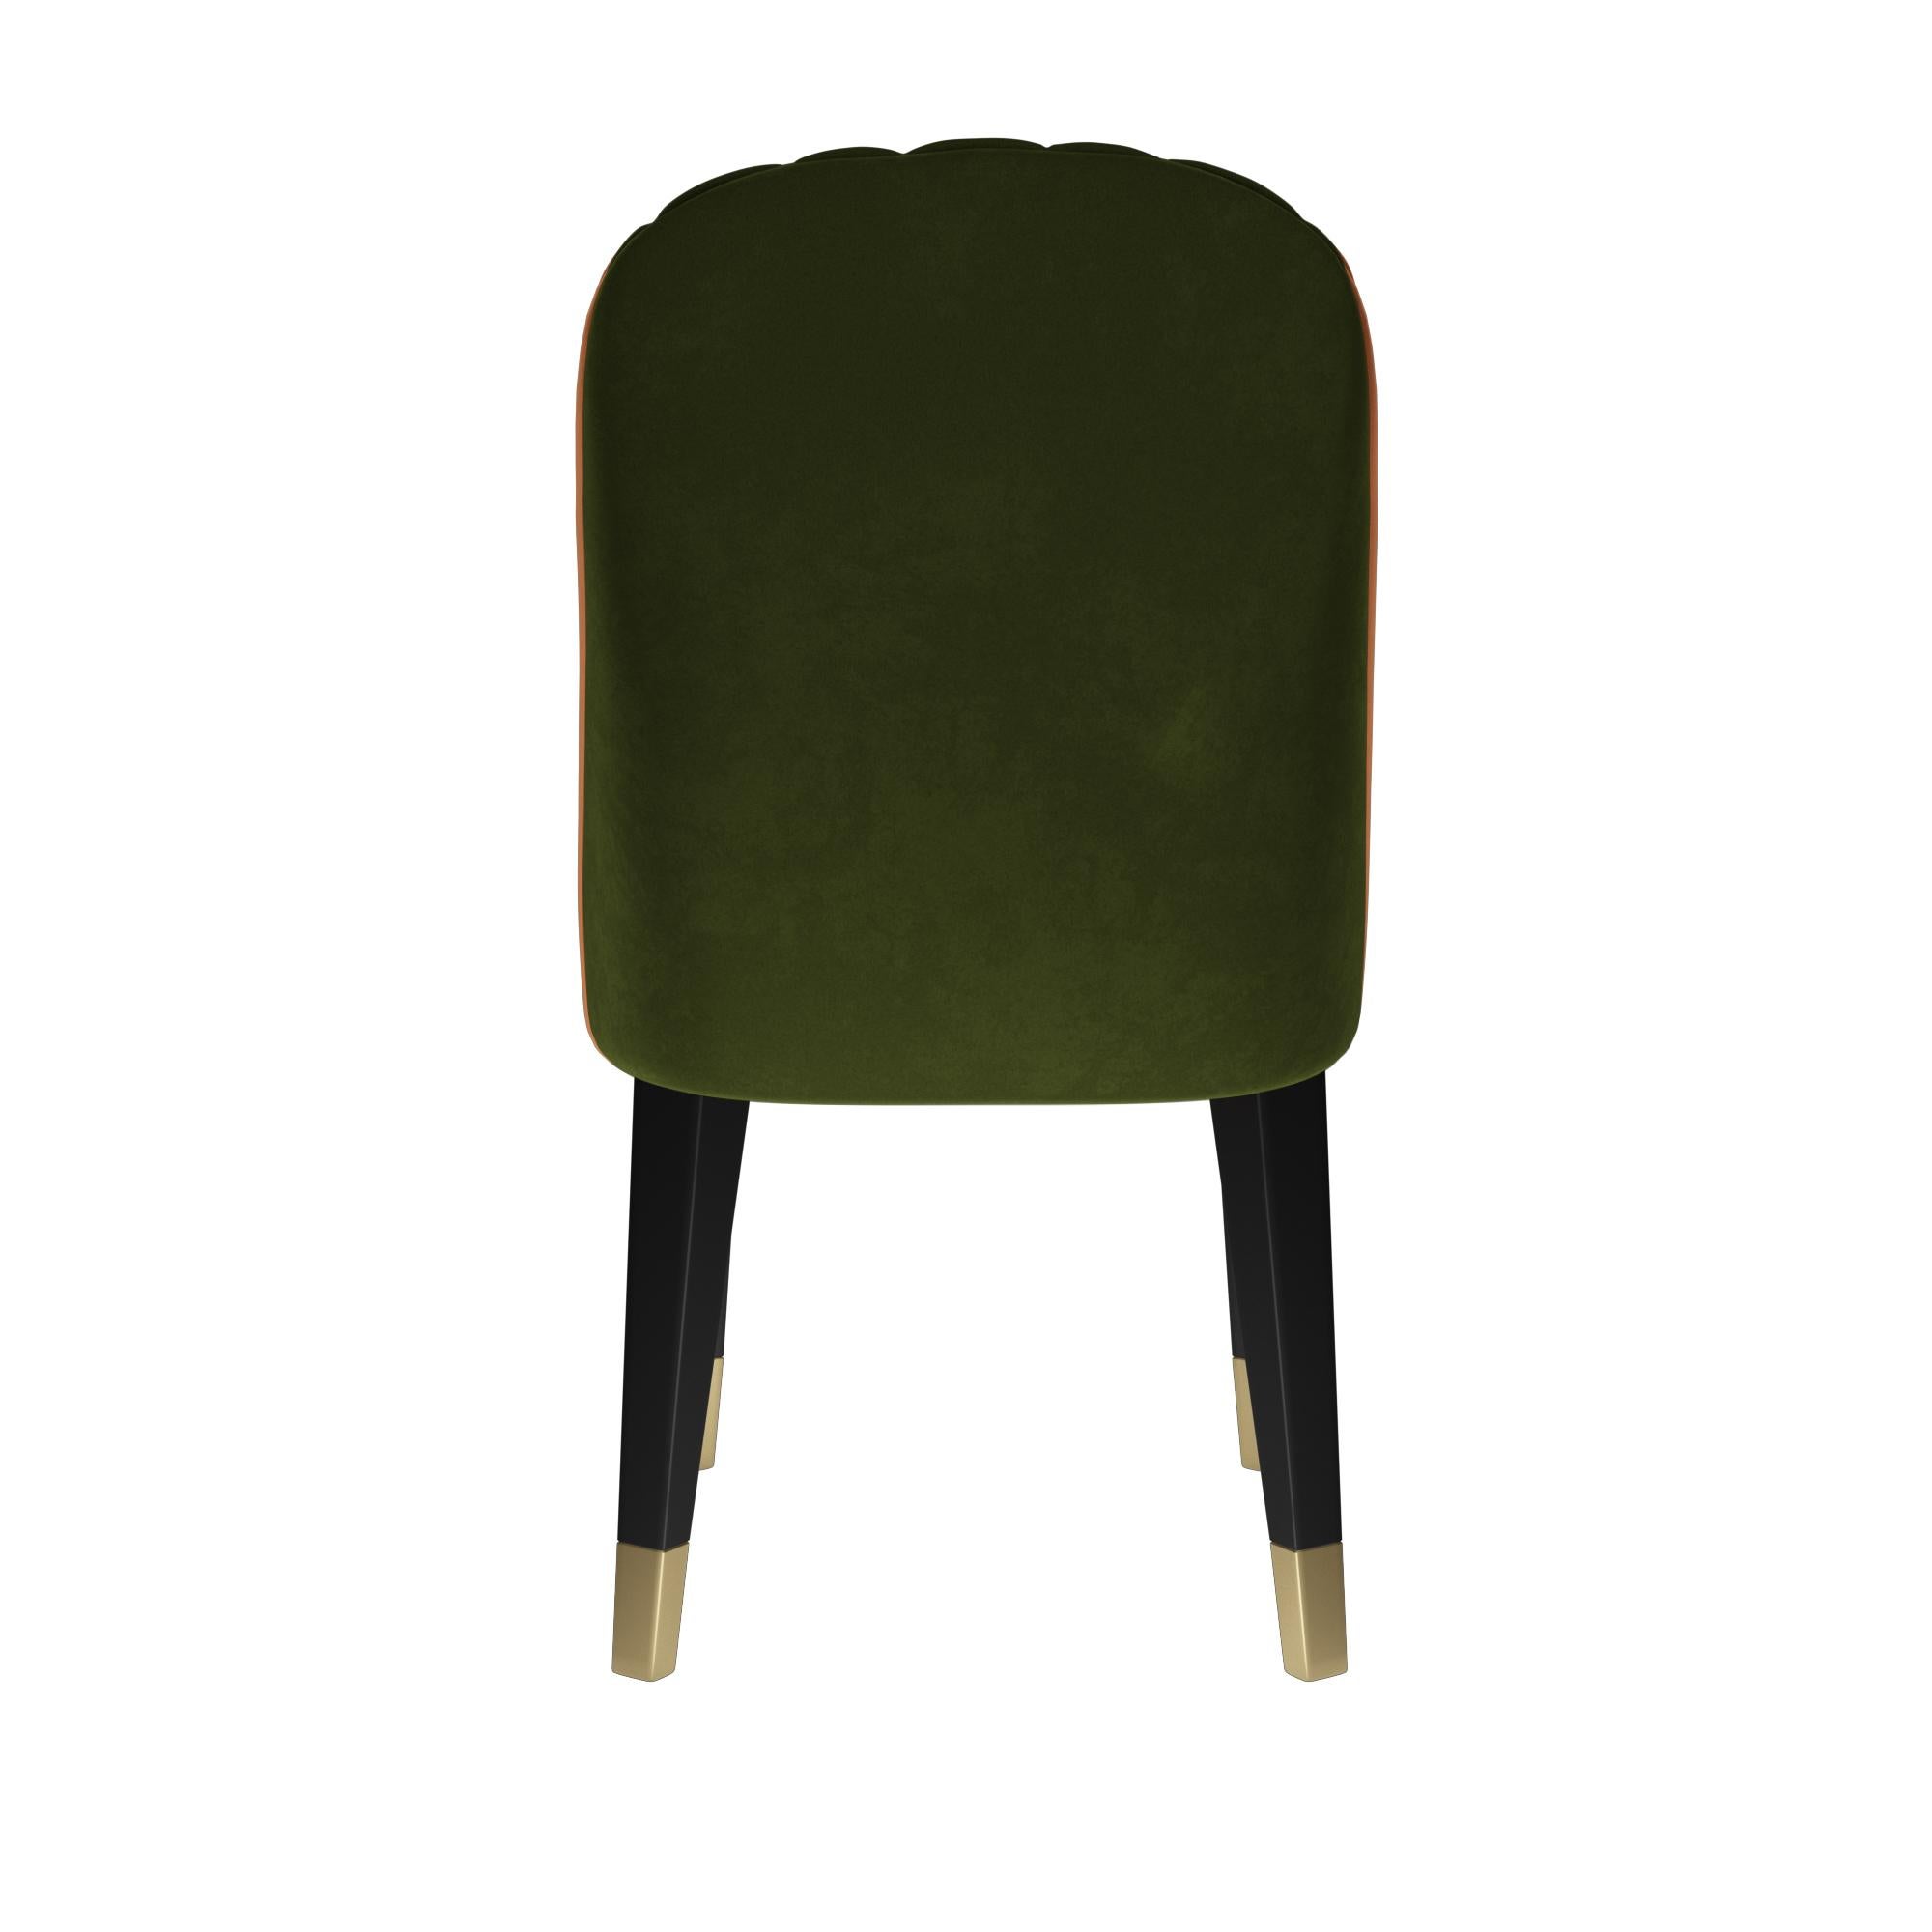 Contemporary dining chair featuring a sculptural curved back with tufted padding to achieve the perfect angle for relaxation. Upholstered in green velvet with very soft alpaca wool look and feel. The velvet is stain resistant and water